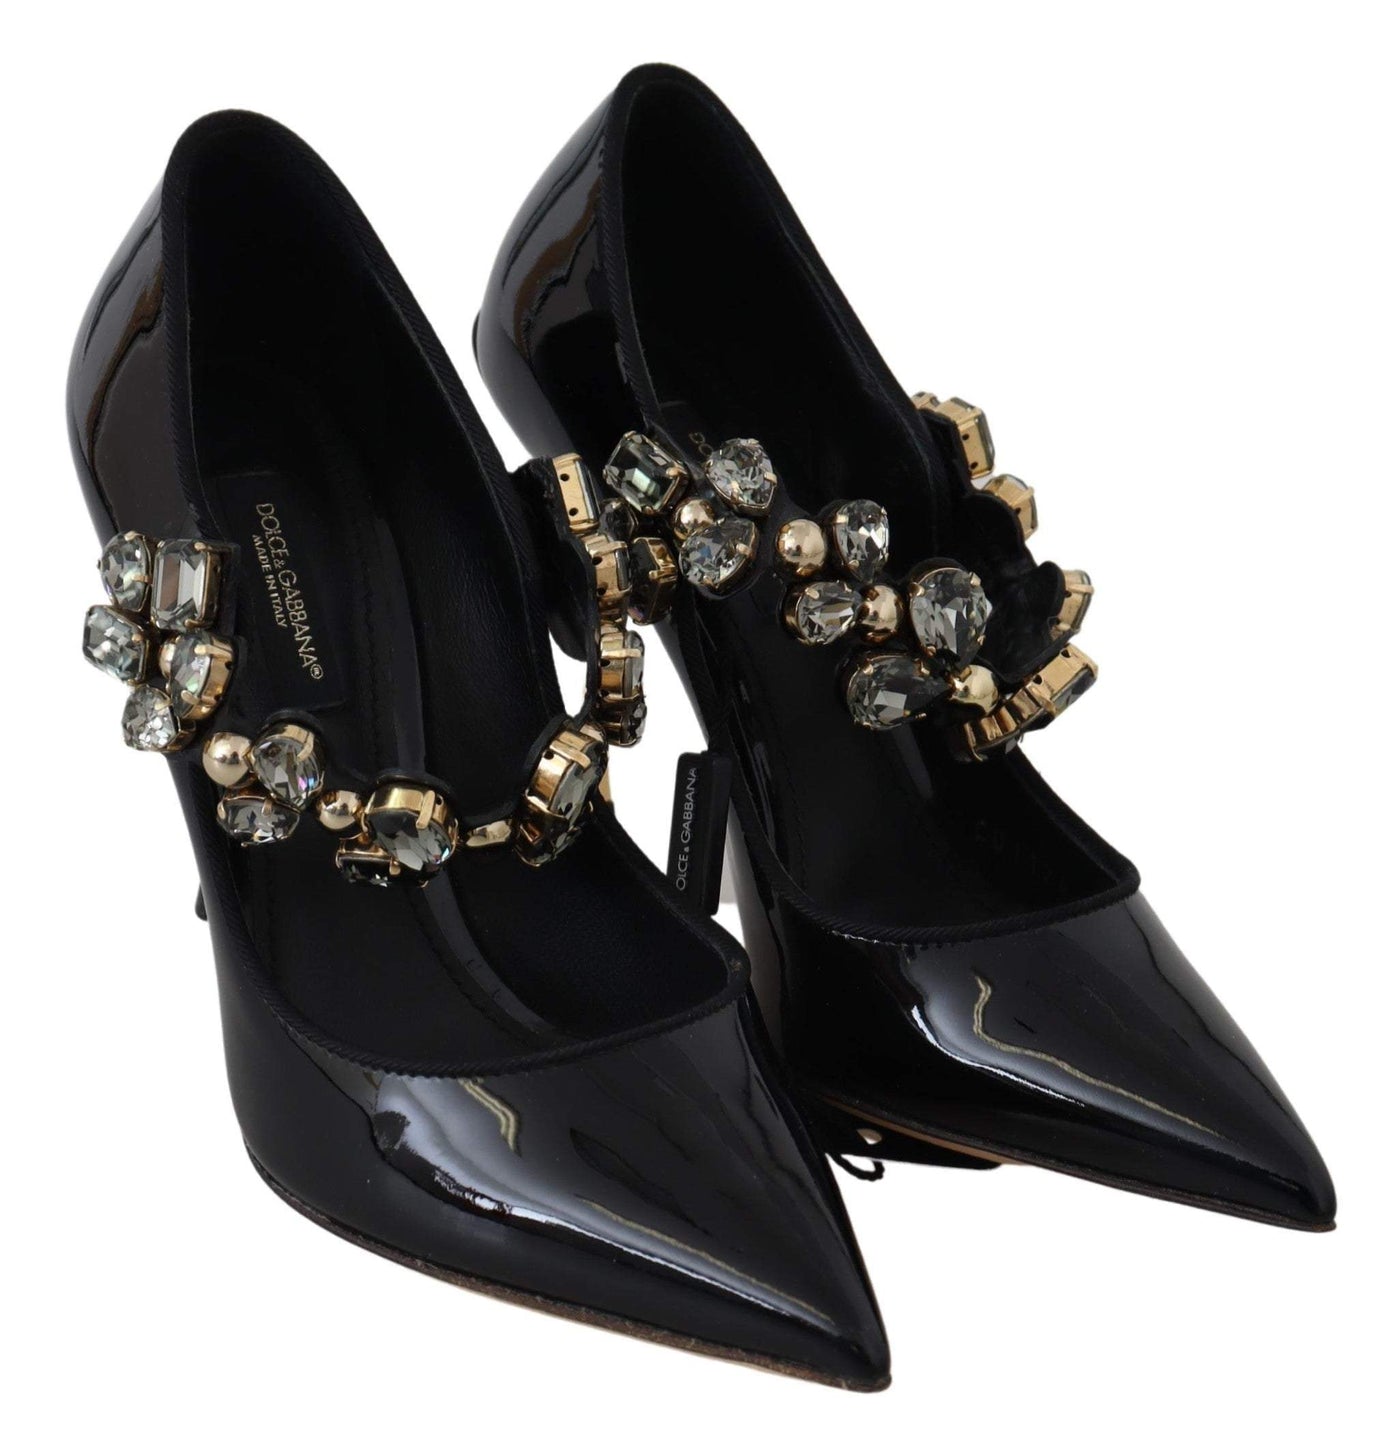 Dolce & Gabbana Black Leather Crystal Shoes Mary Jane Pumps #women, Black, Dolce & Gabbana, EU35/US4.5, feed-agegroup-adult, feed-color-Black, feed-gender-female, Pumps - Women - Shoes, Shoes - New Arrivals at SEYMAYKA